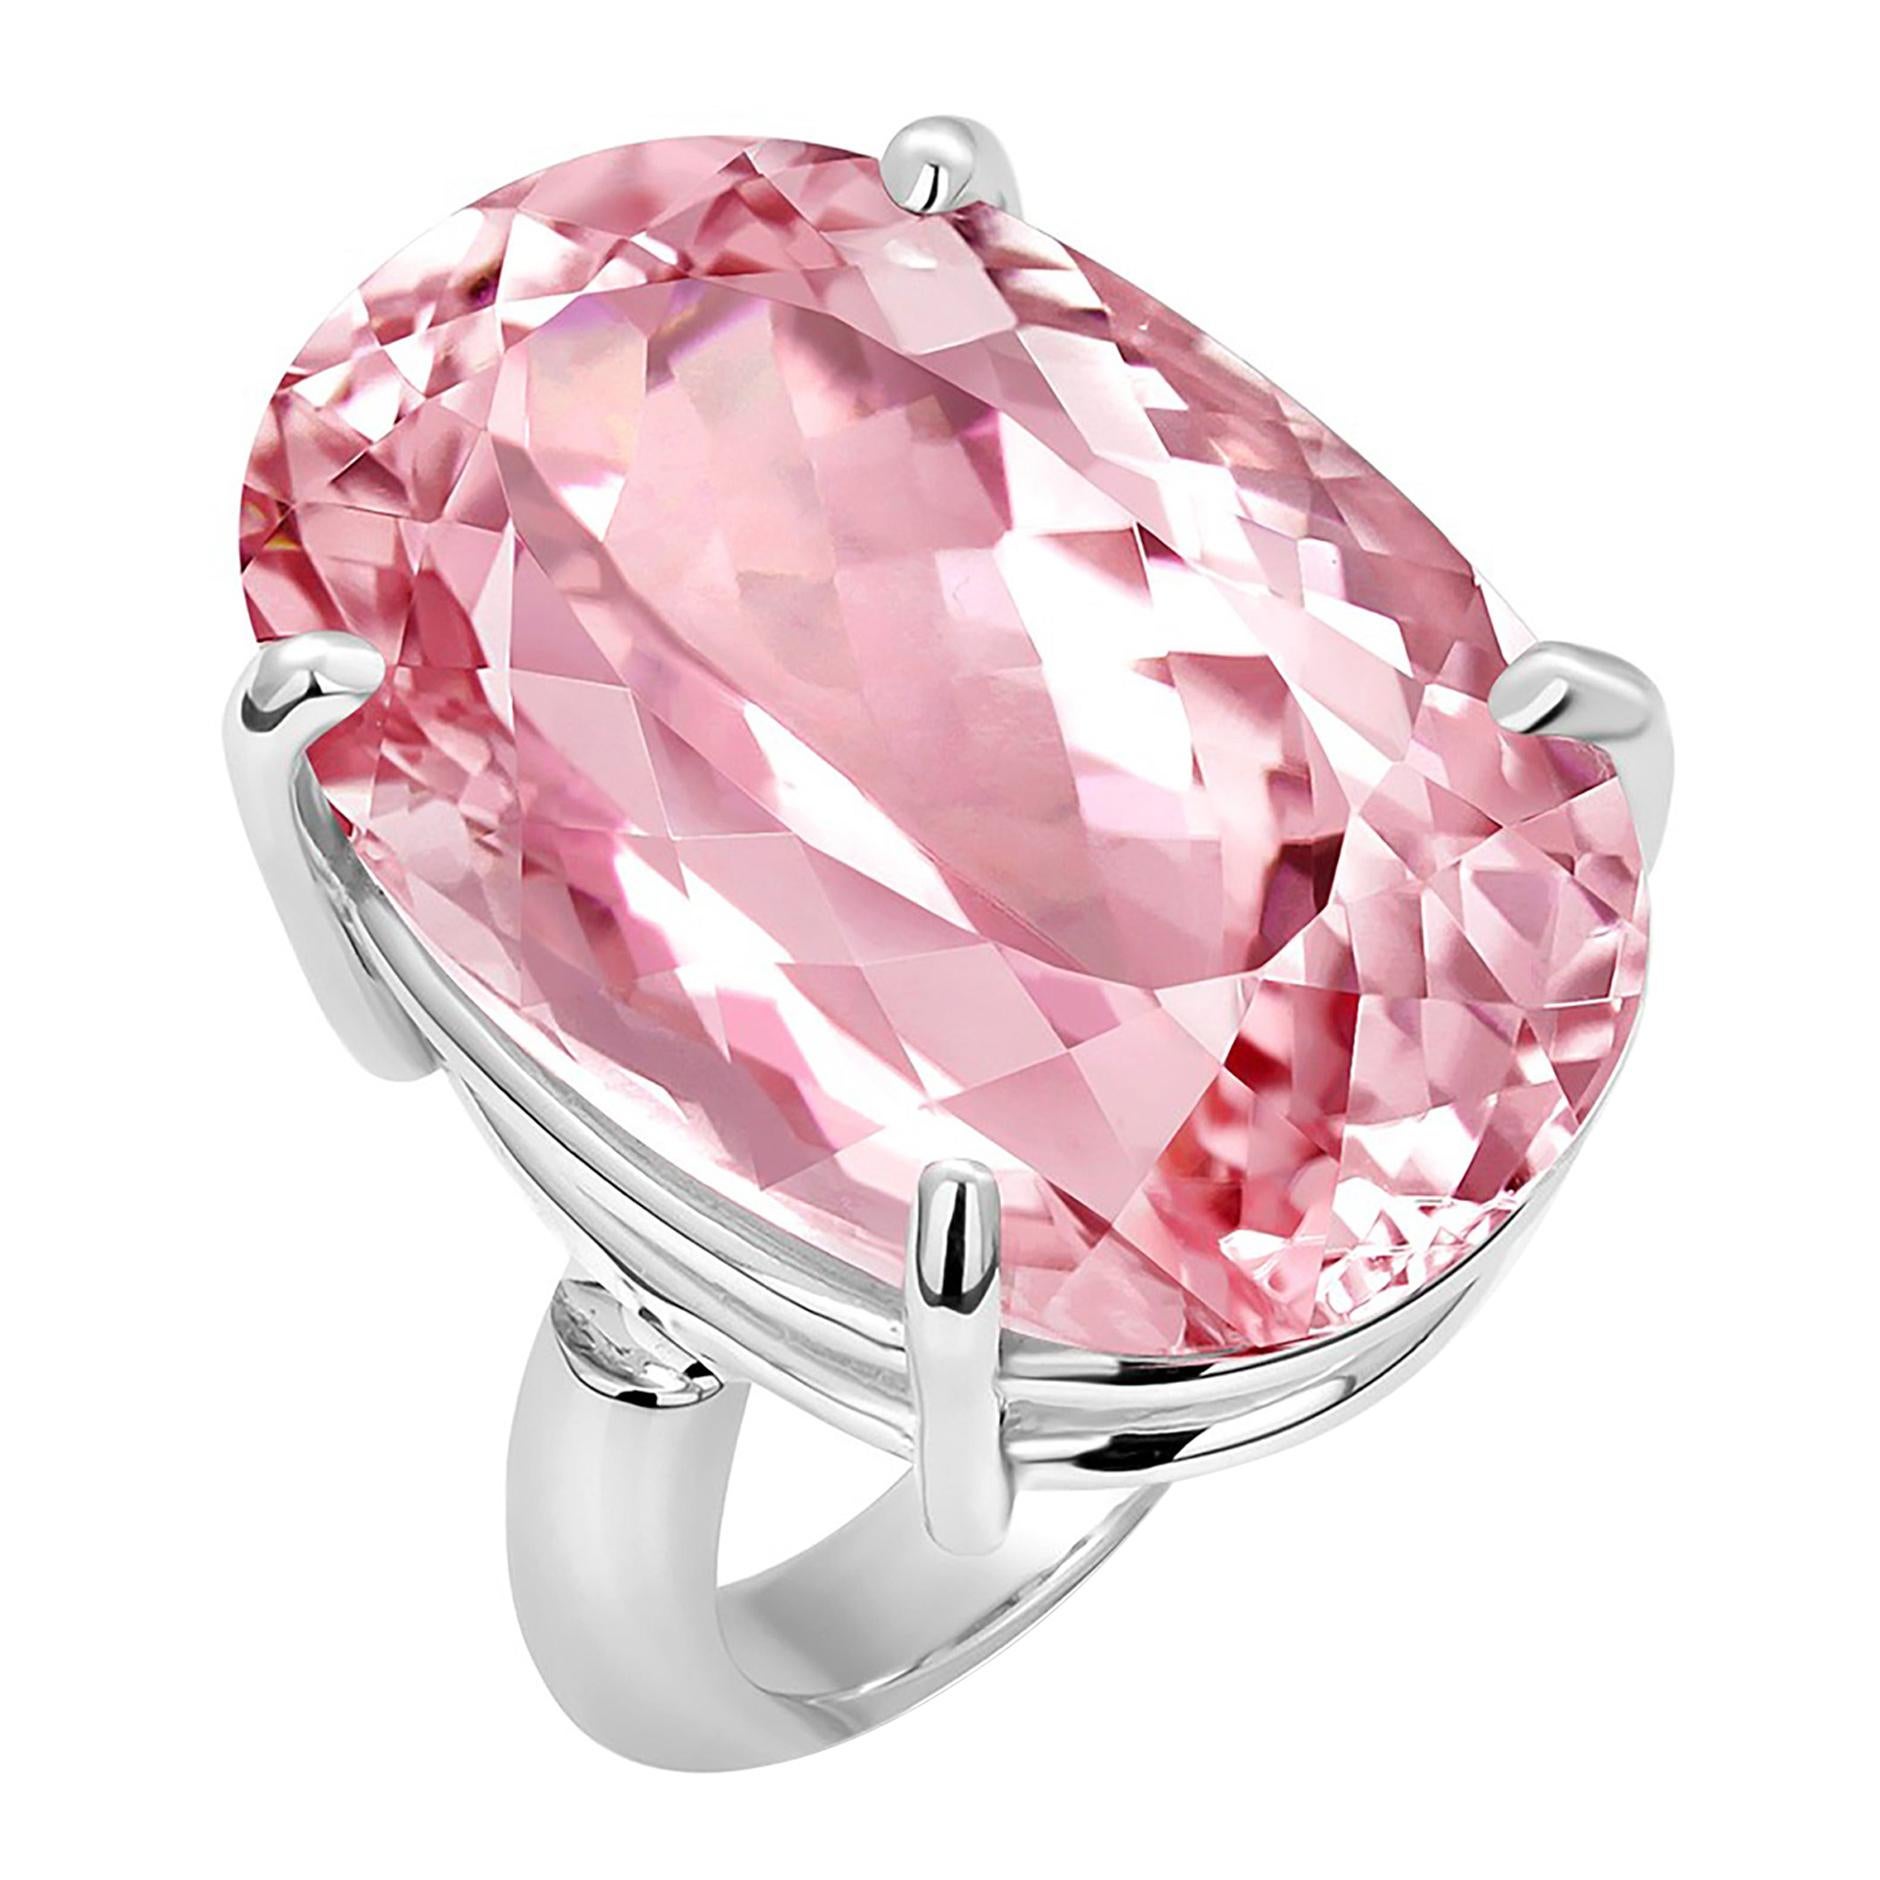 Oval Shaped Pink Kunzite Weighing 28.61 Carats White Gold Cocktail Ring